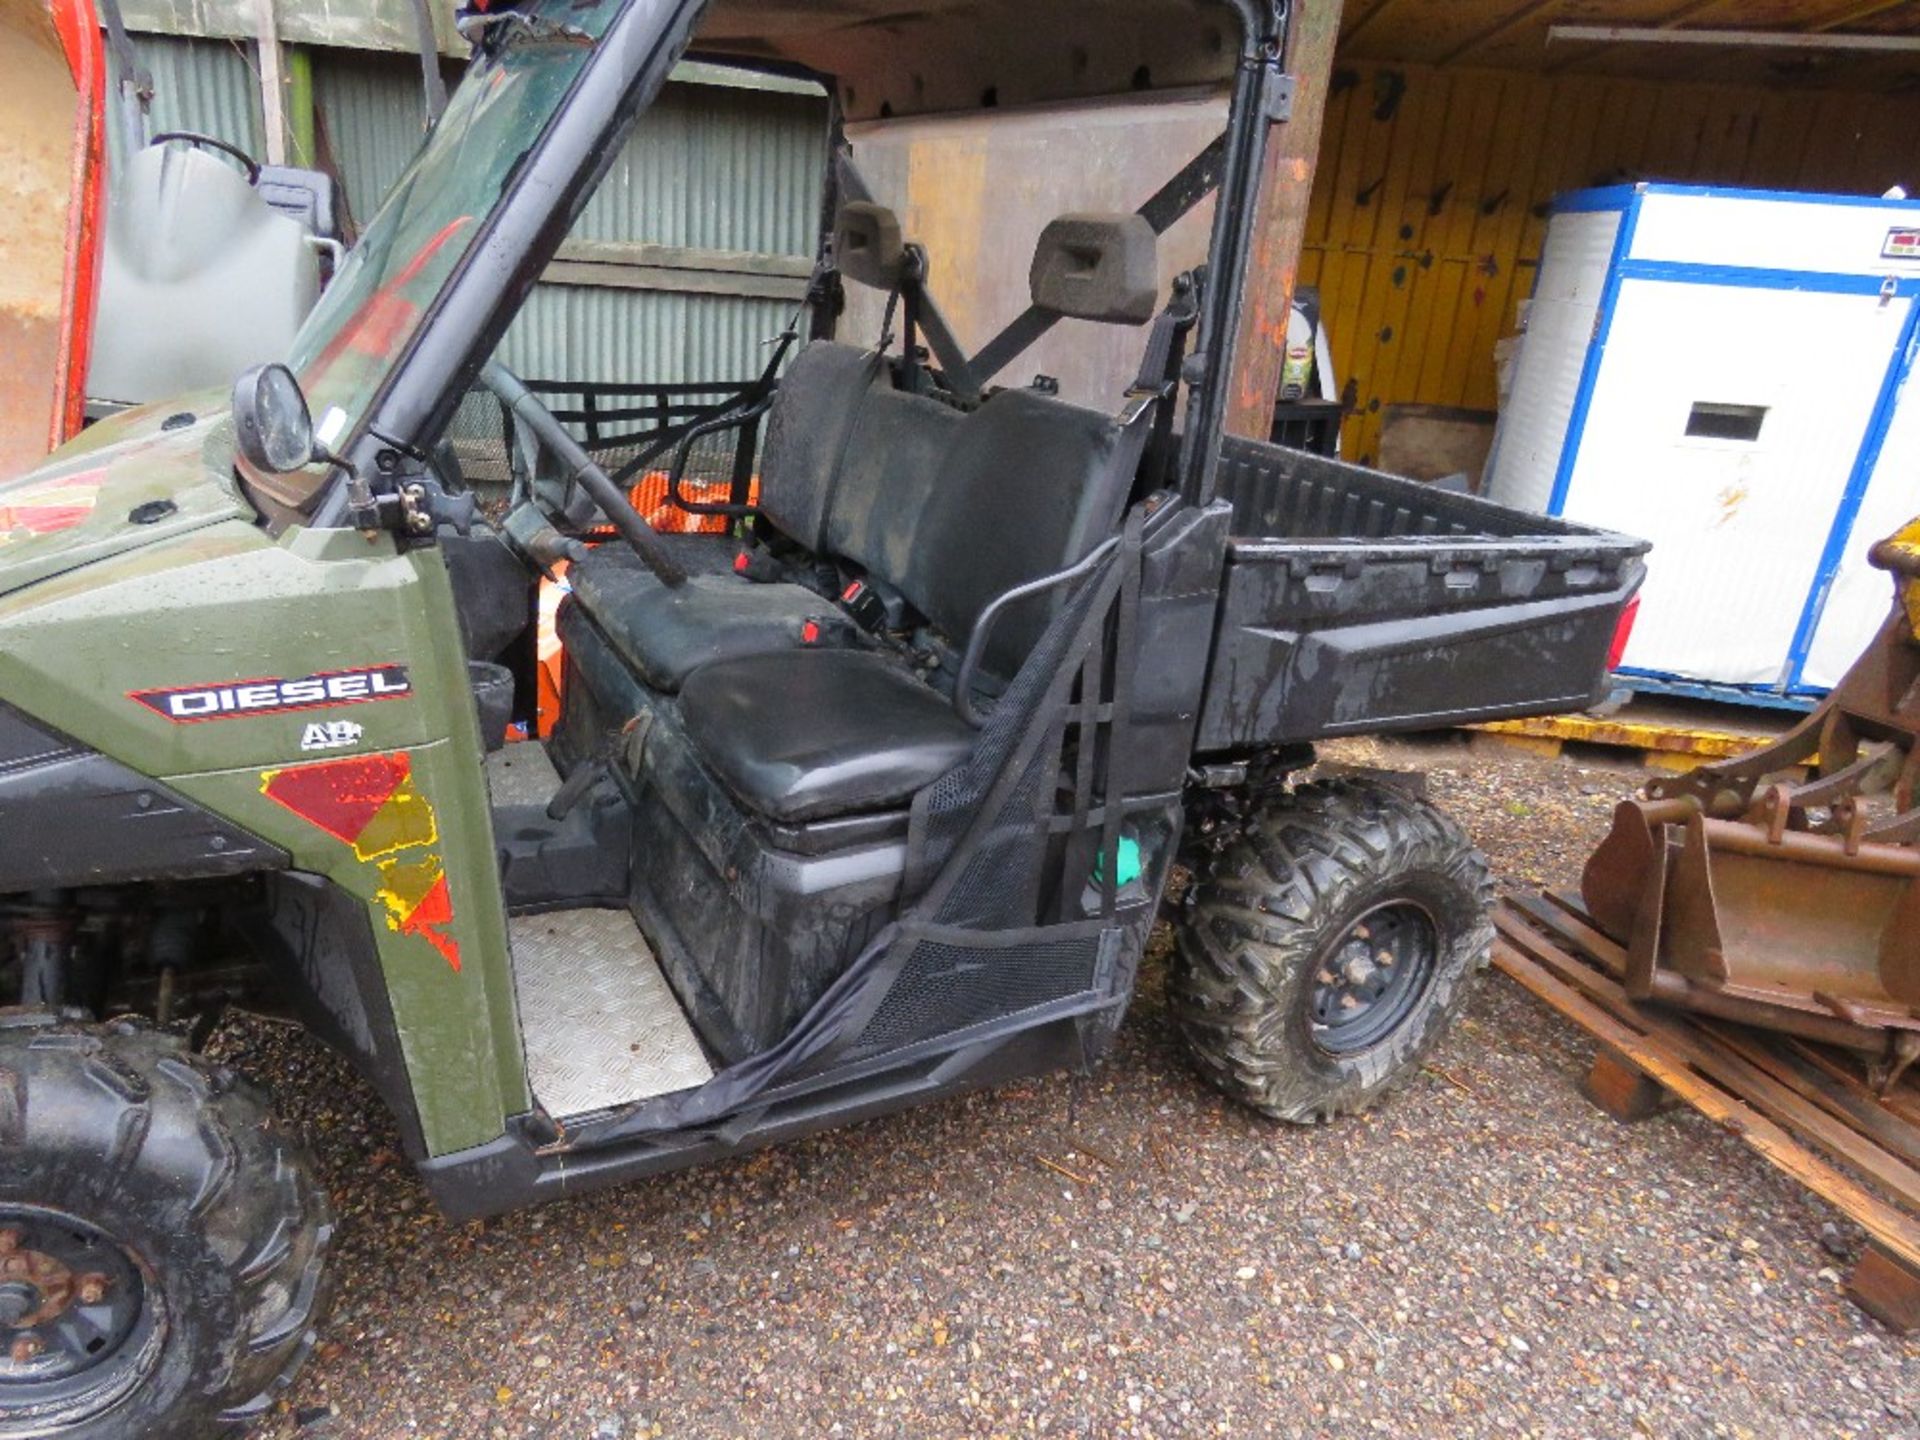 POLARIS RANGER DIESEL RTV BUGGY REG:EU68 EOY. FRONT AND REAR SCREENS AND ROOF. 2018 WITH V5. WHEN TE - Image 2 of 12